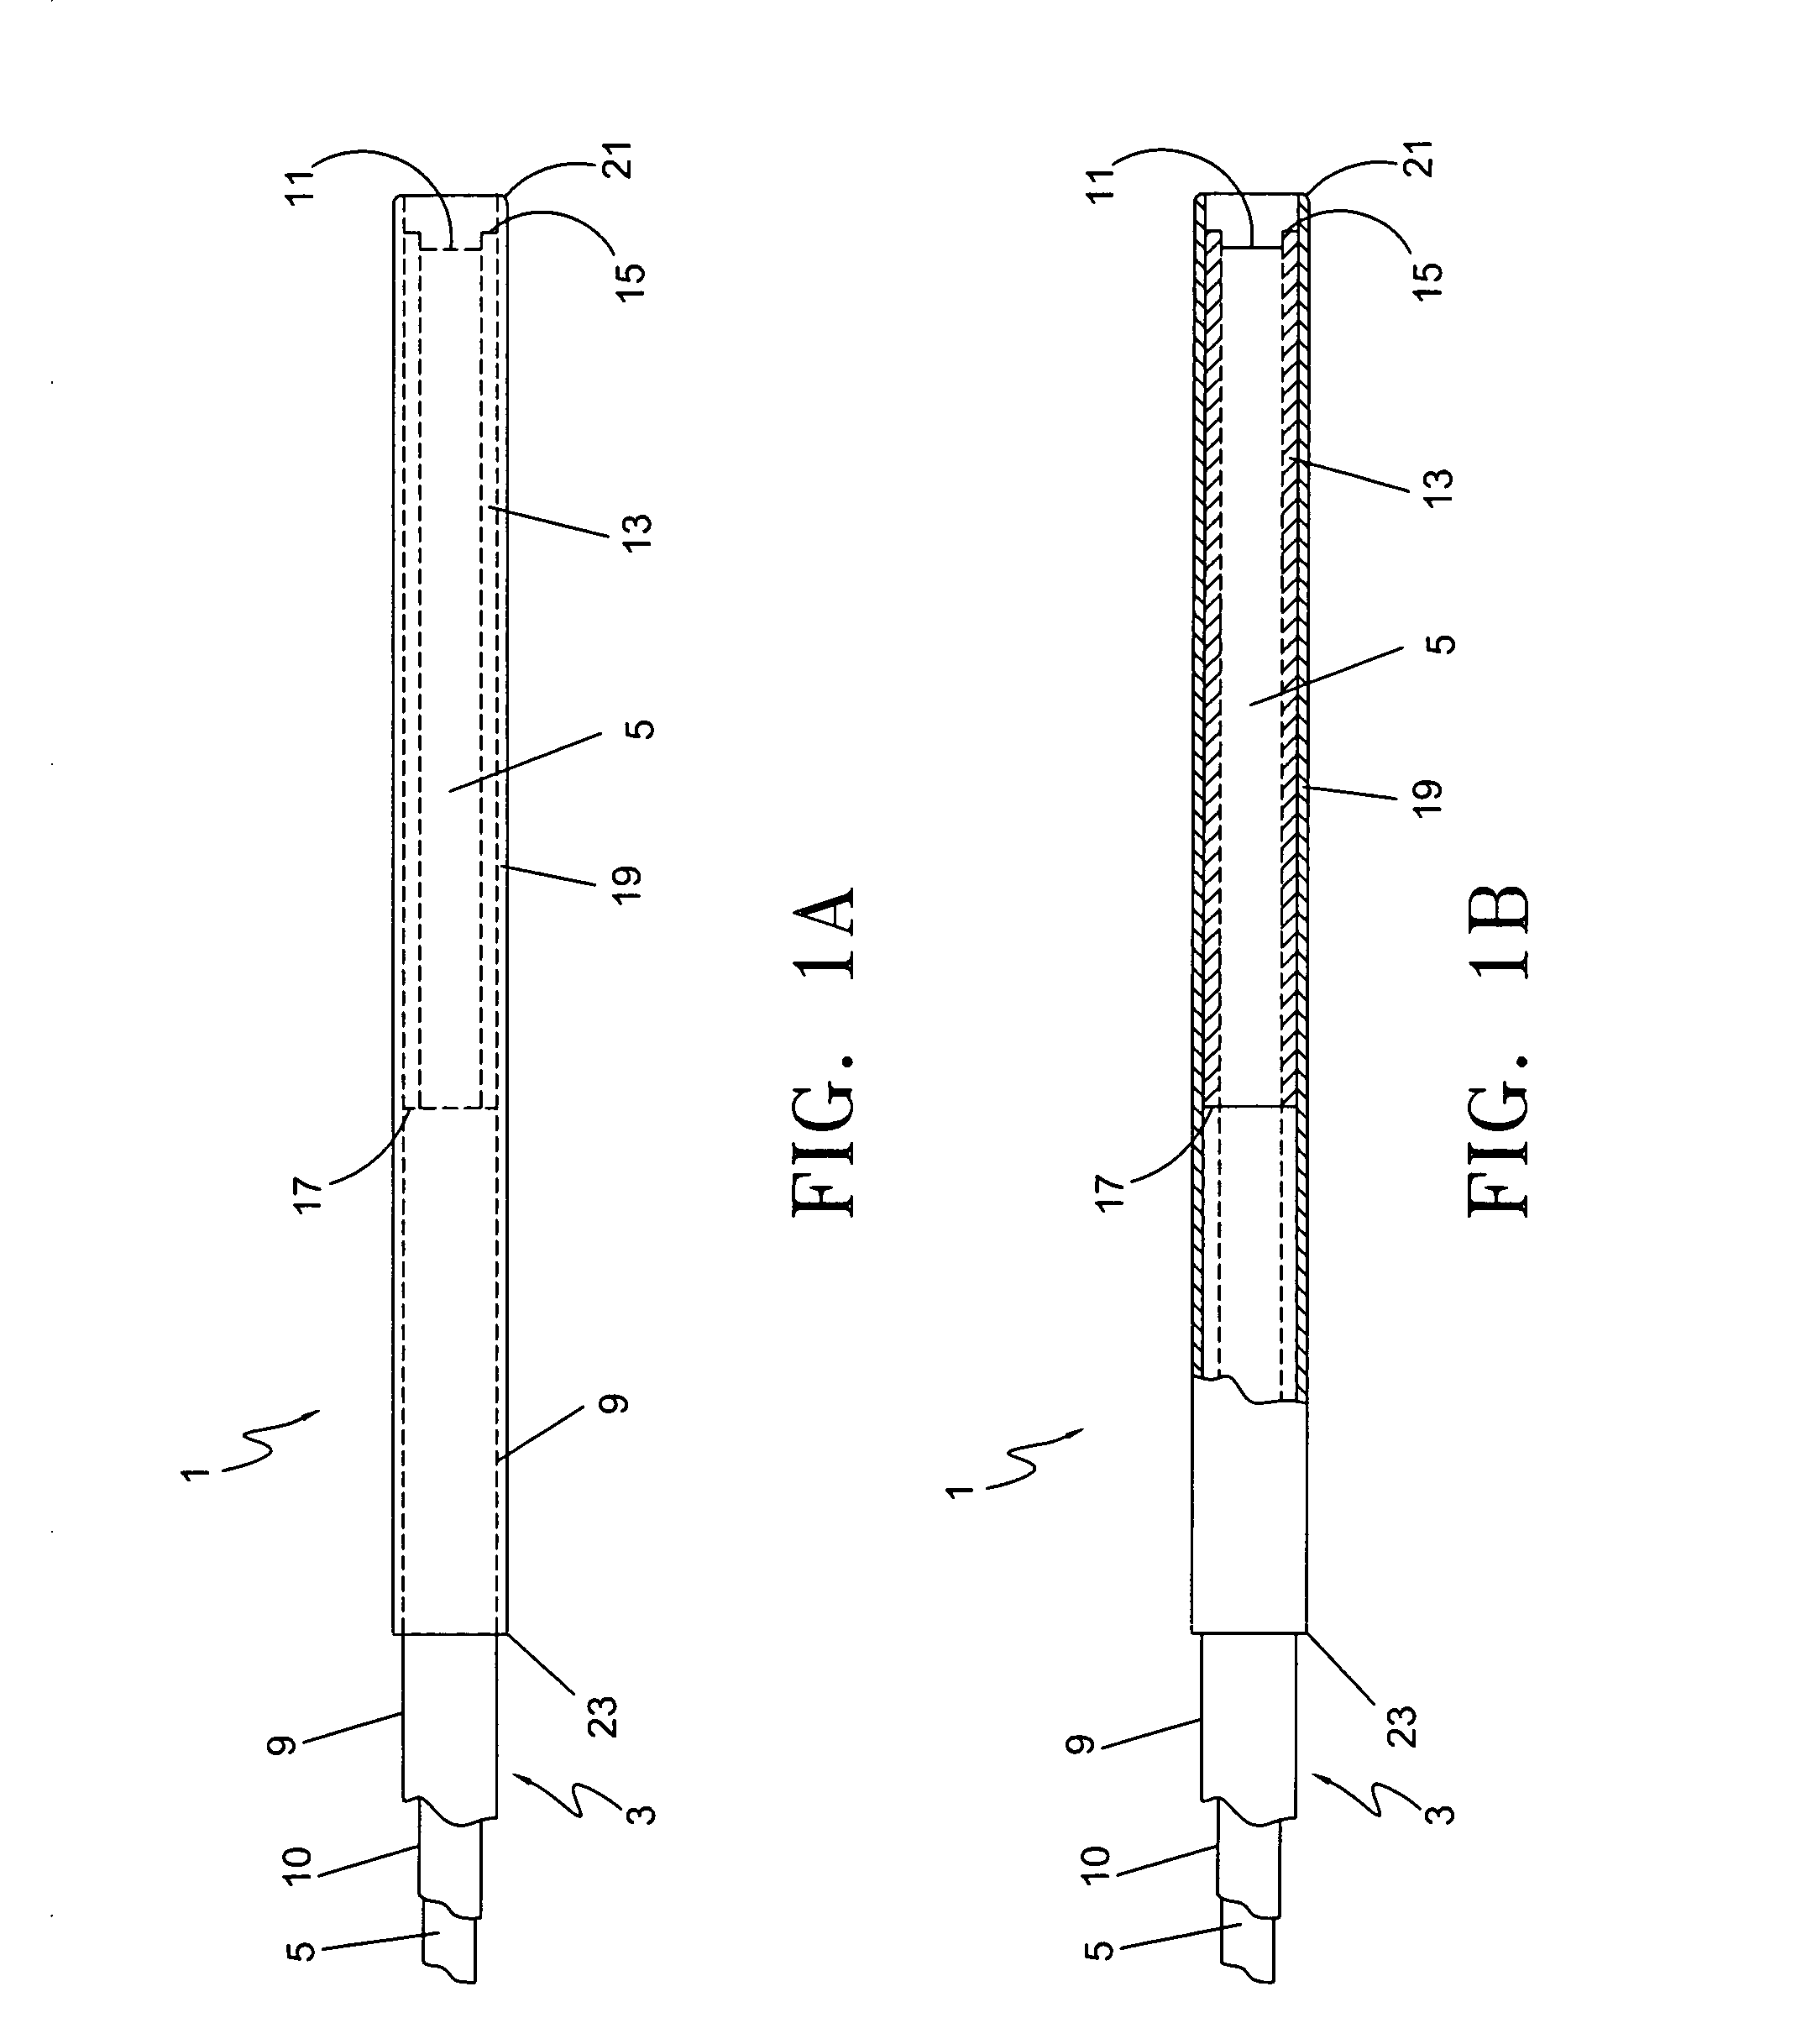 Device and method for endovascular treatment for causing closure of a blood vessel